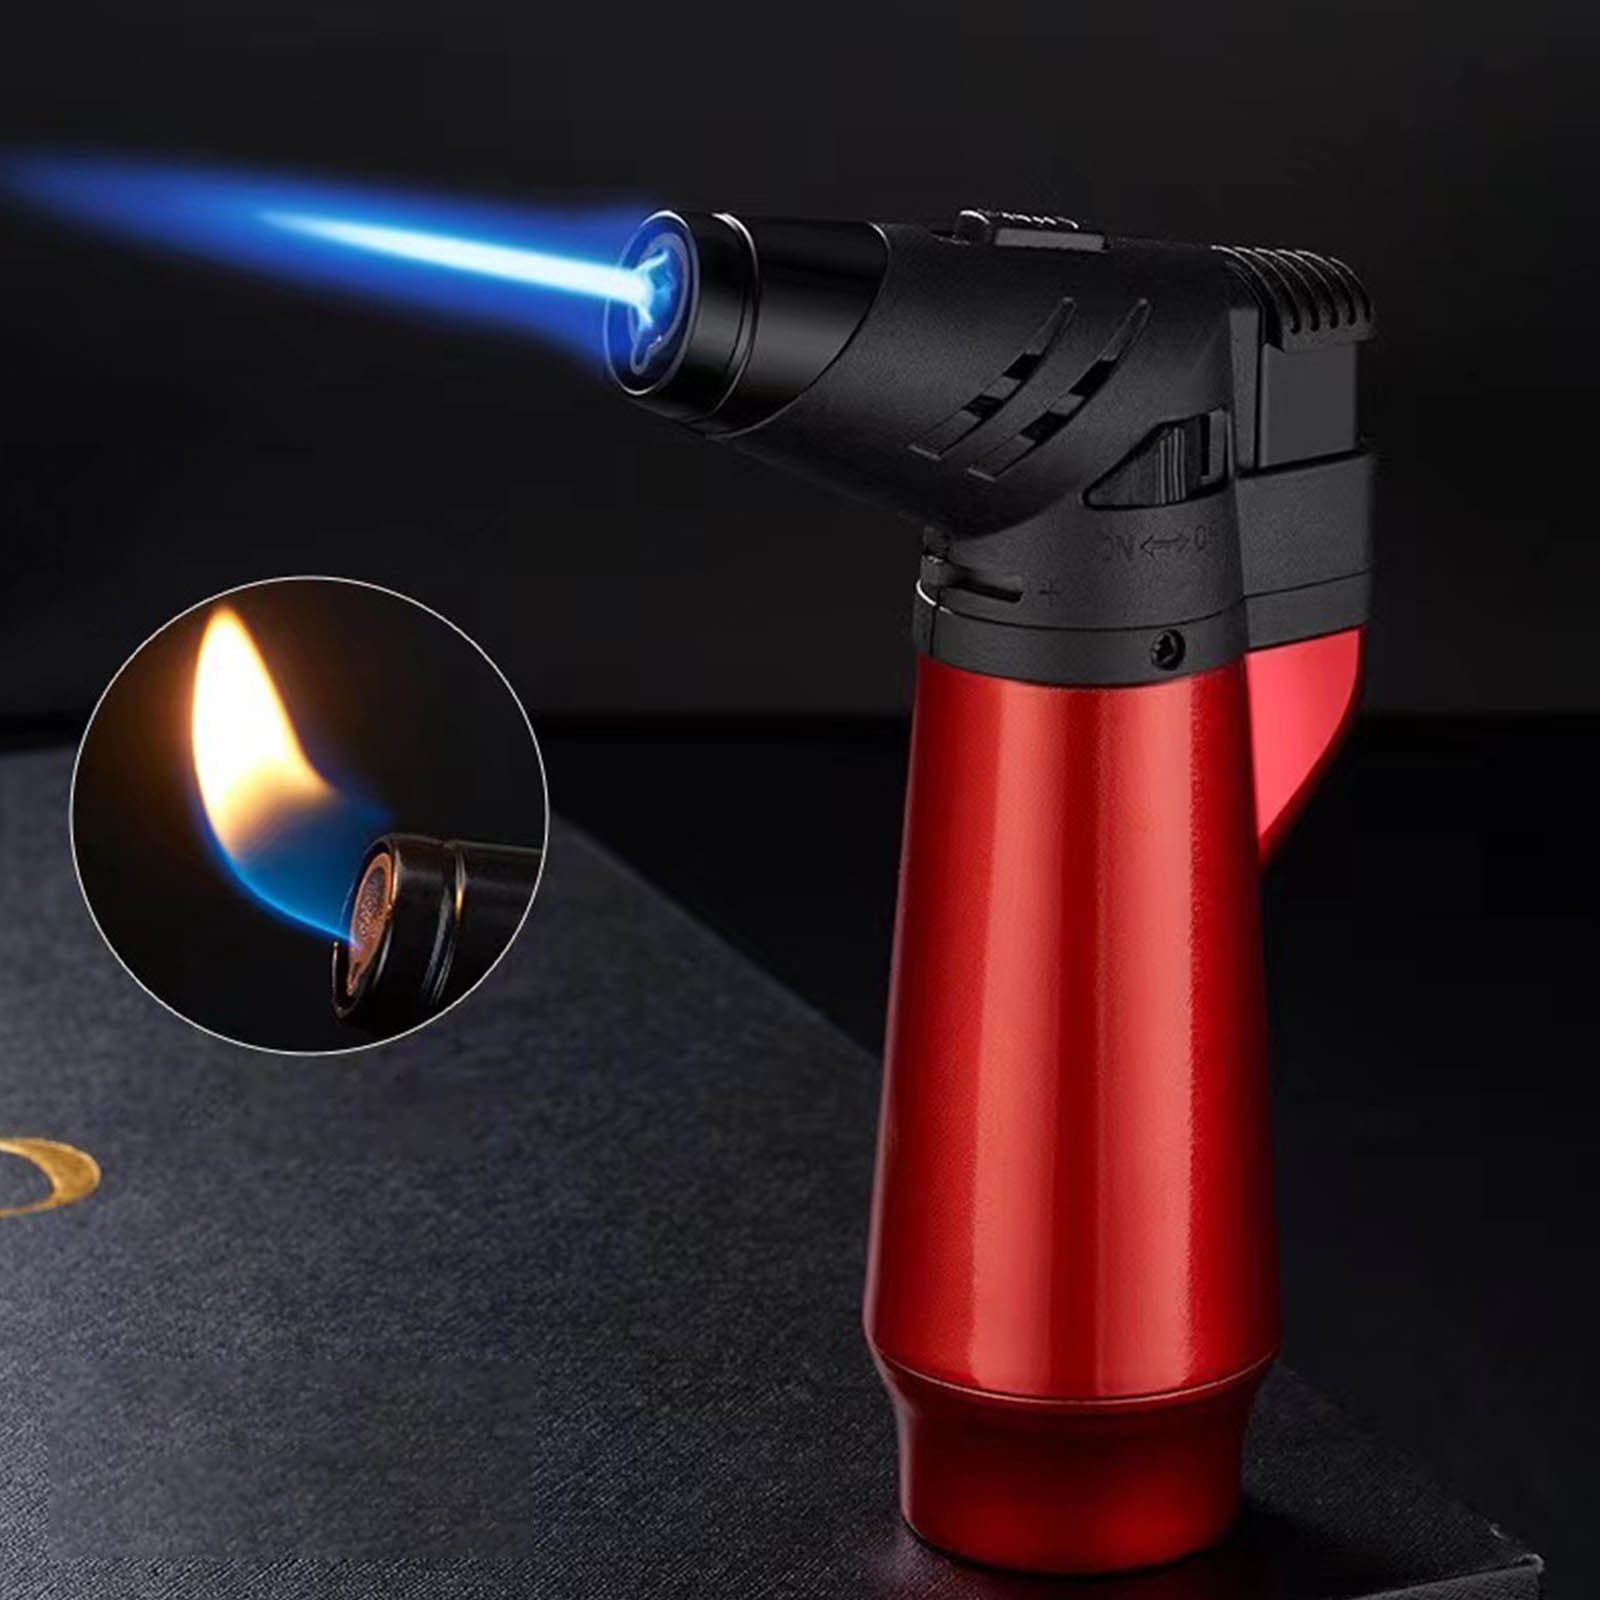 PRINxy Windproof Torch Lighter, Refillable Lighter,Adjust Flame,Used for  Barbecue Kitchen Fireplace Candles Incense Camping Etc(Gas Not Included)  Black 